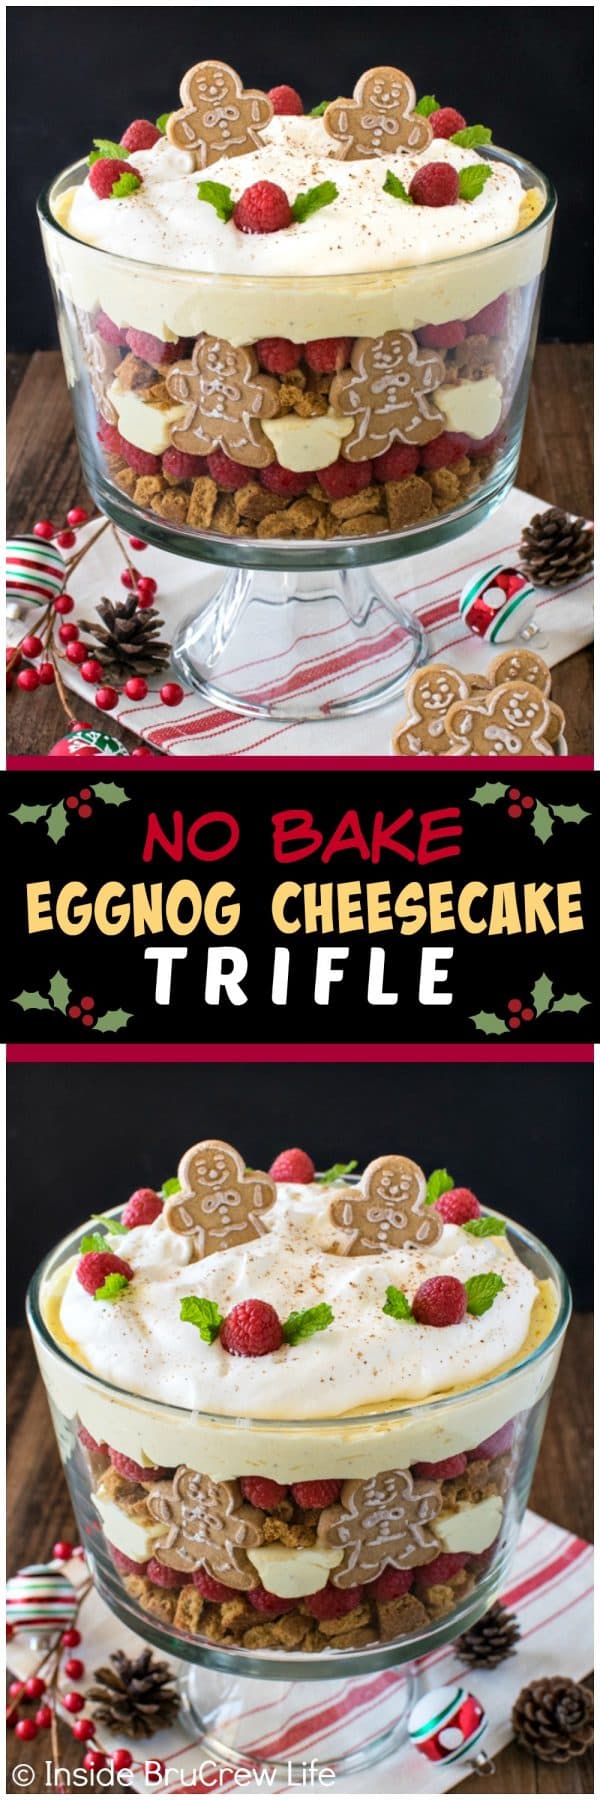 No Bake Eggnog Cheesecake Trifle - layers of cookies, berries, & cheesecake creates an impressive but easy dessert. Great recipe for Christmas parties!